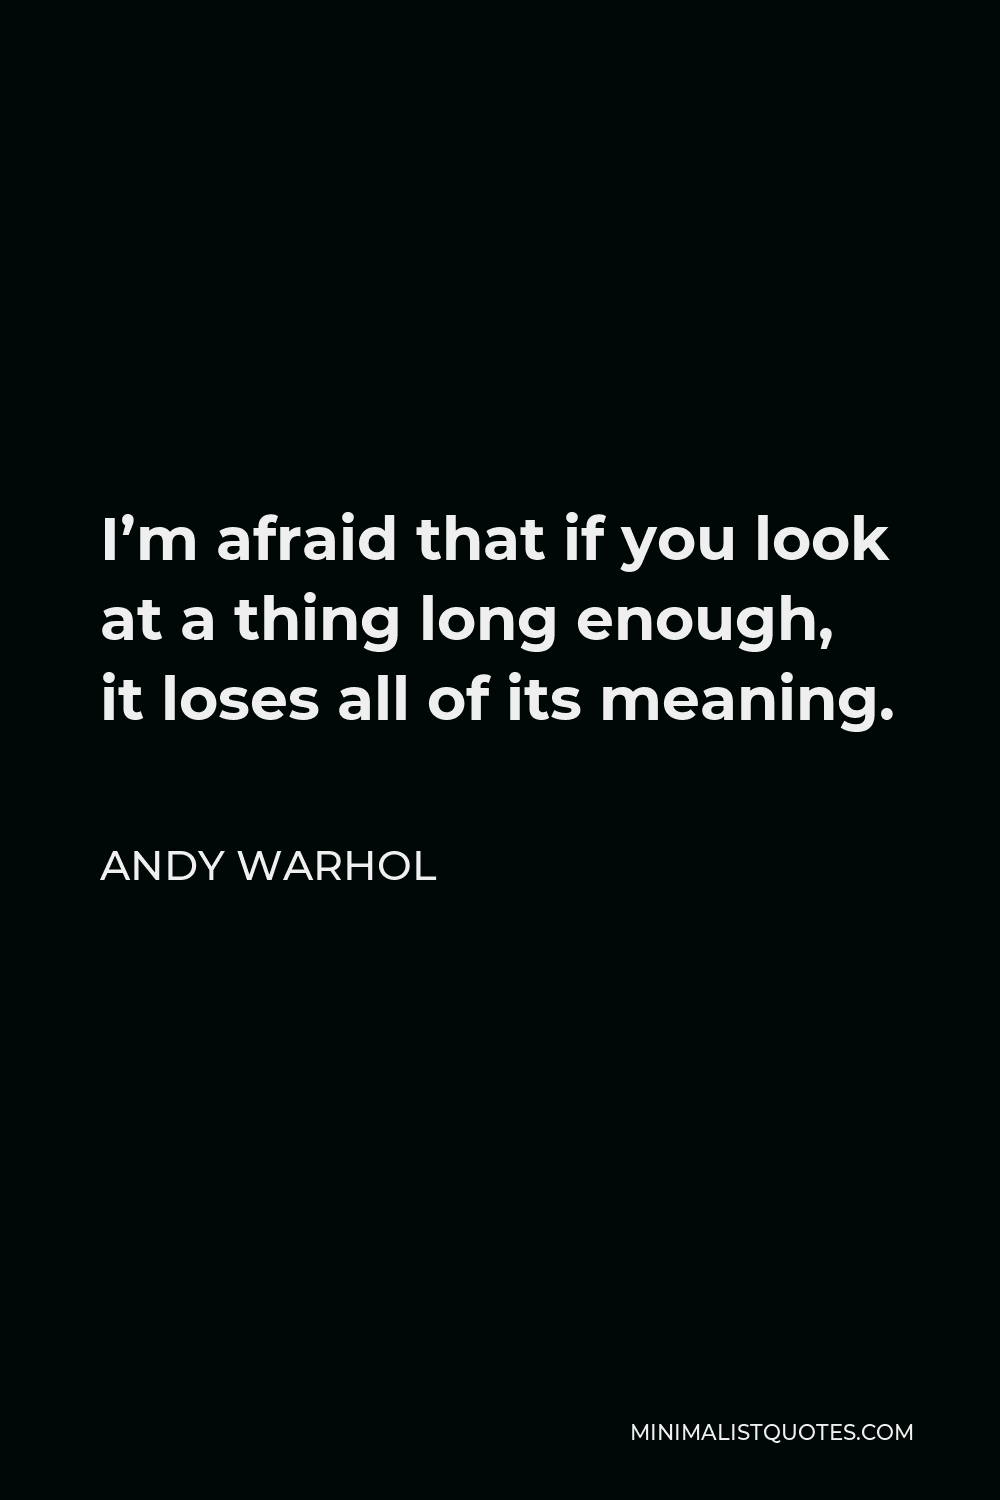 Andy Warhol Quote - I’m afraid that if you look at a thing long enough, it loses all of its meaning.